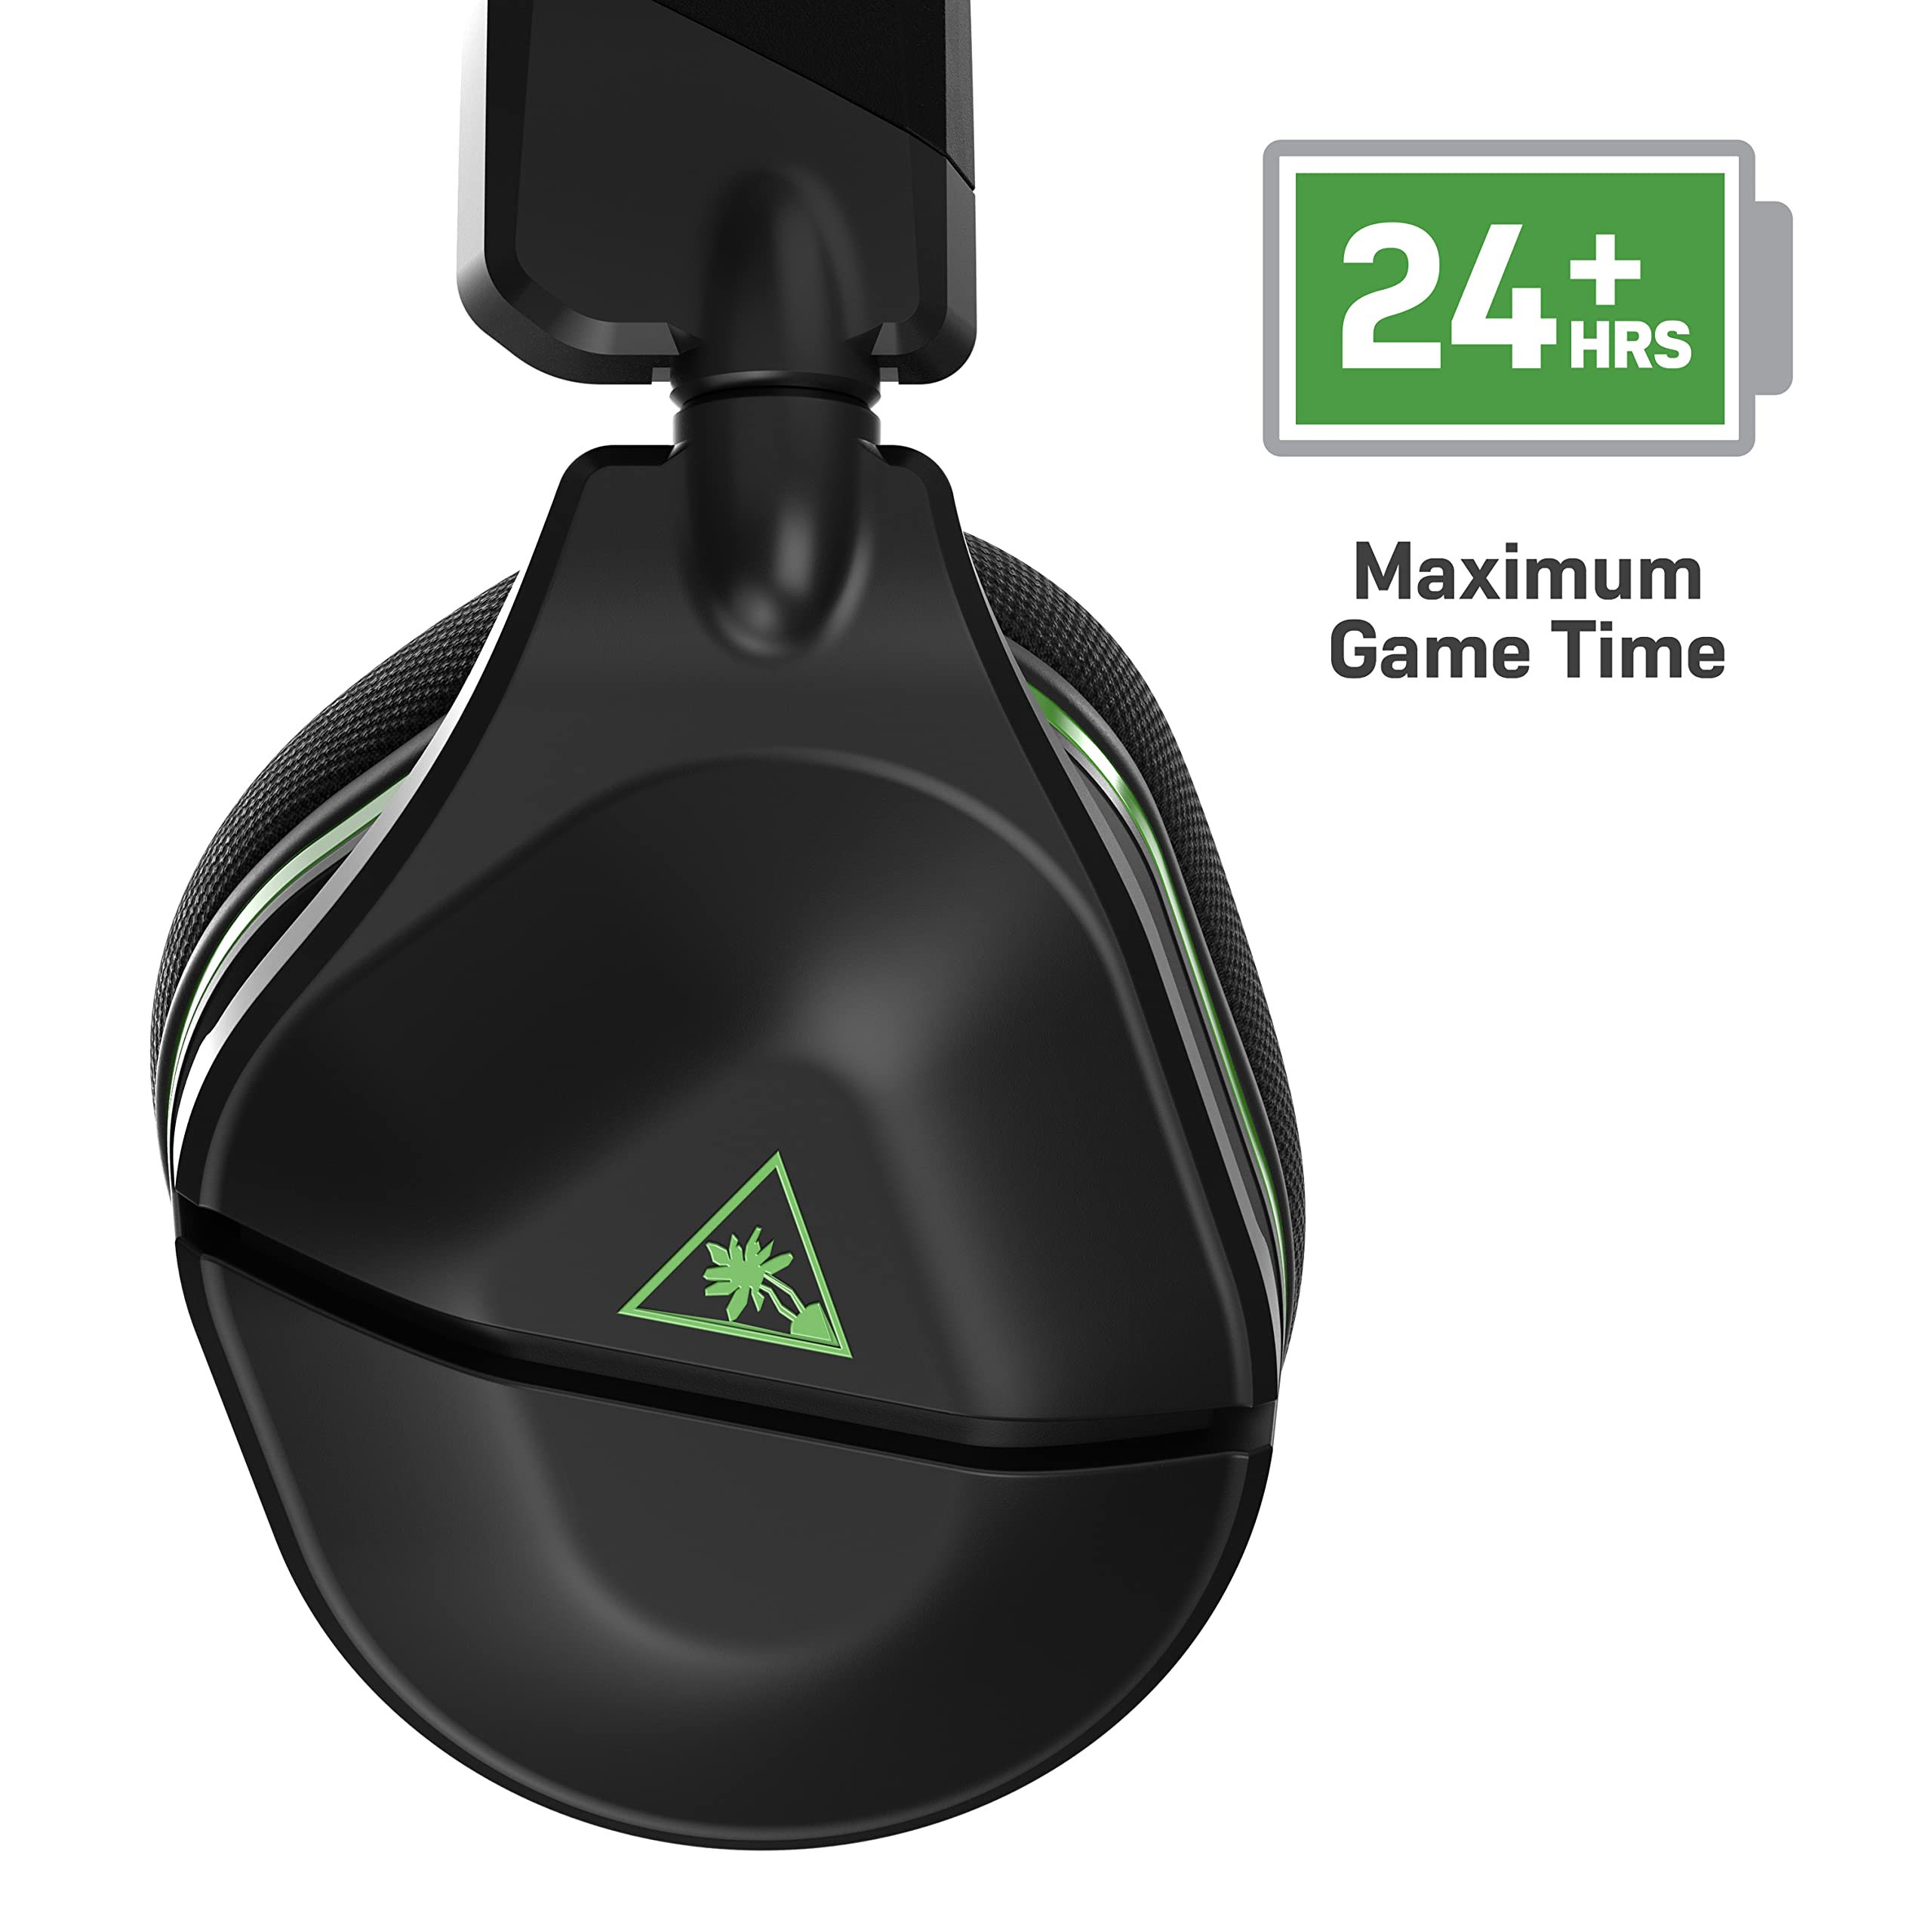 Turtle Beach Stealth 600 Gen 2 USB Wireless Amplified Gaming Headset - Licensed for Xbox Series X, Xbox Series S, & Xbox One - 24+ Hour Battery, 50mm Speakers, Flip-to-Mute Mic, Spatial Audio - Black